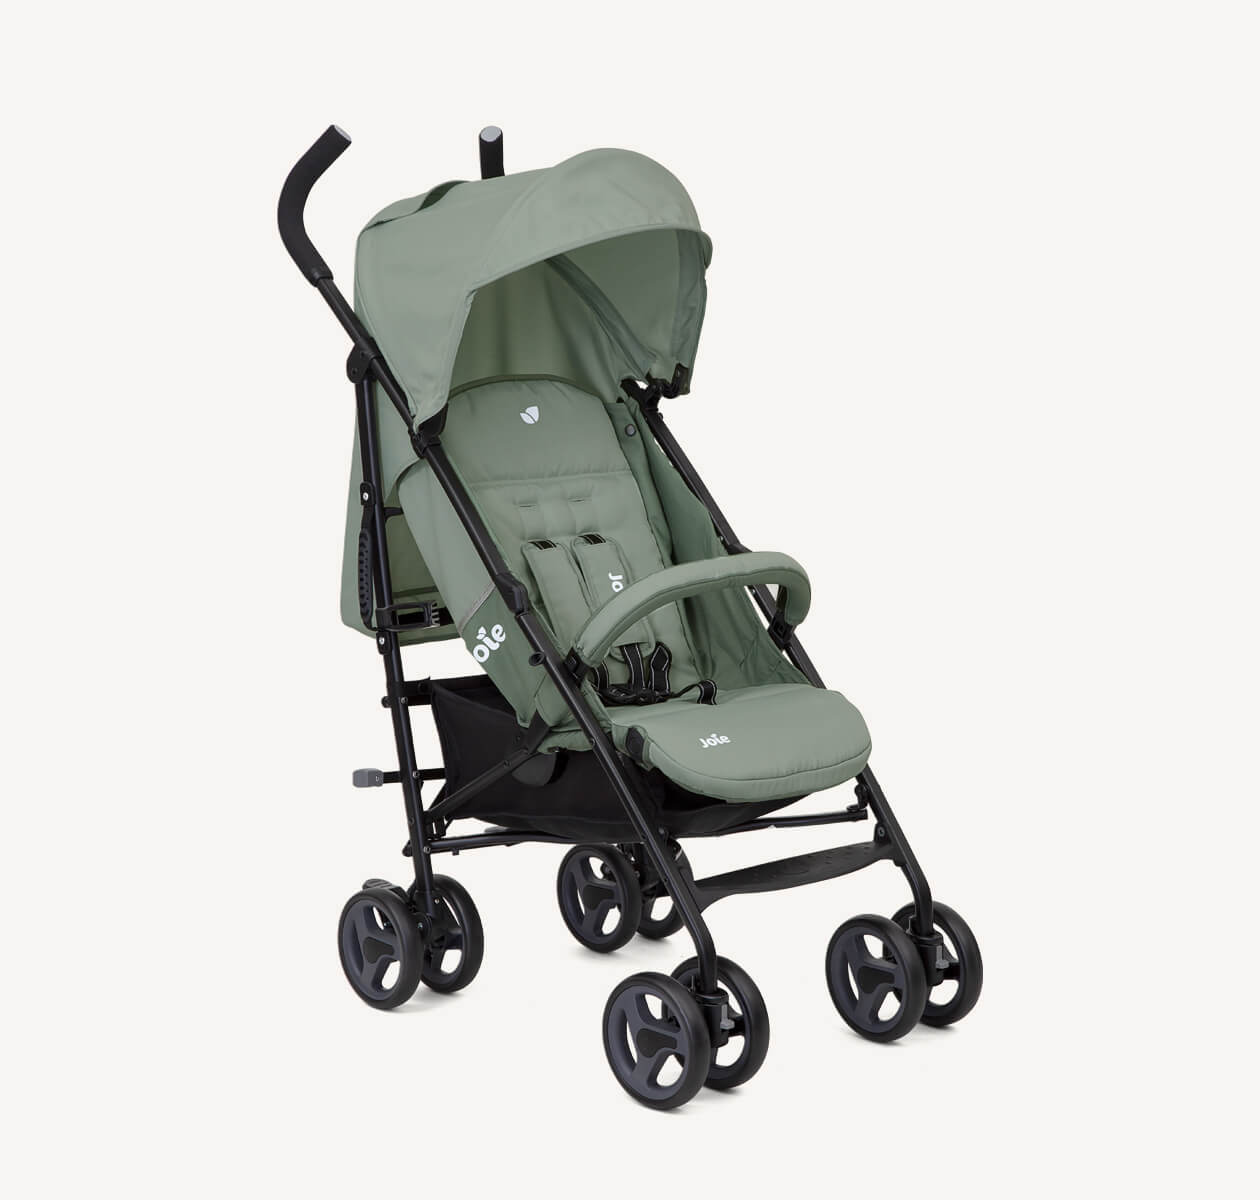  Joie green nitro stroller positioned at a right angle.